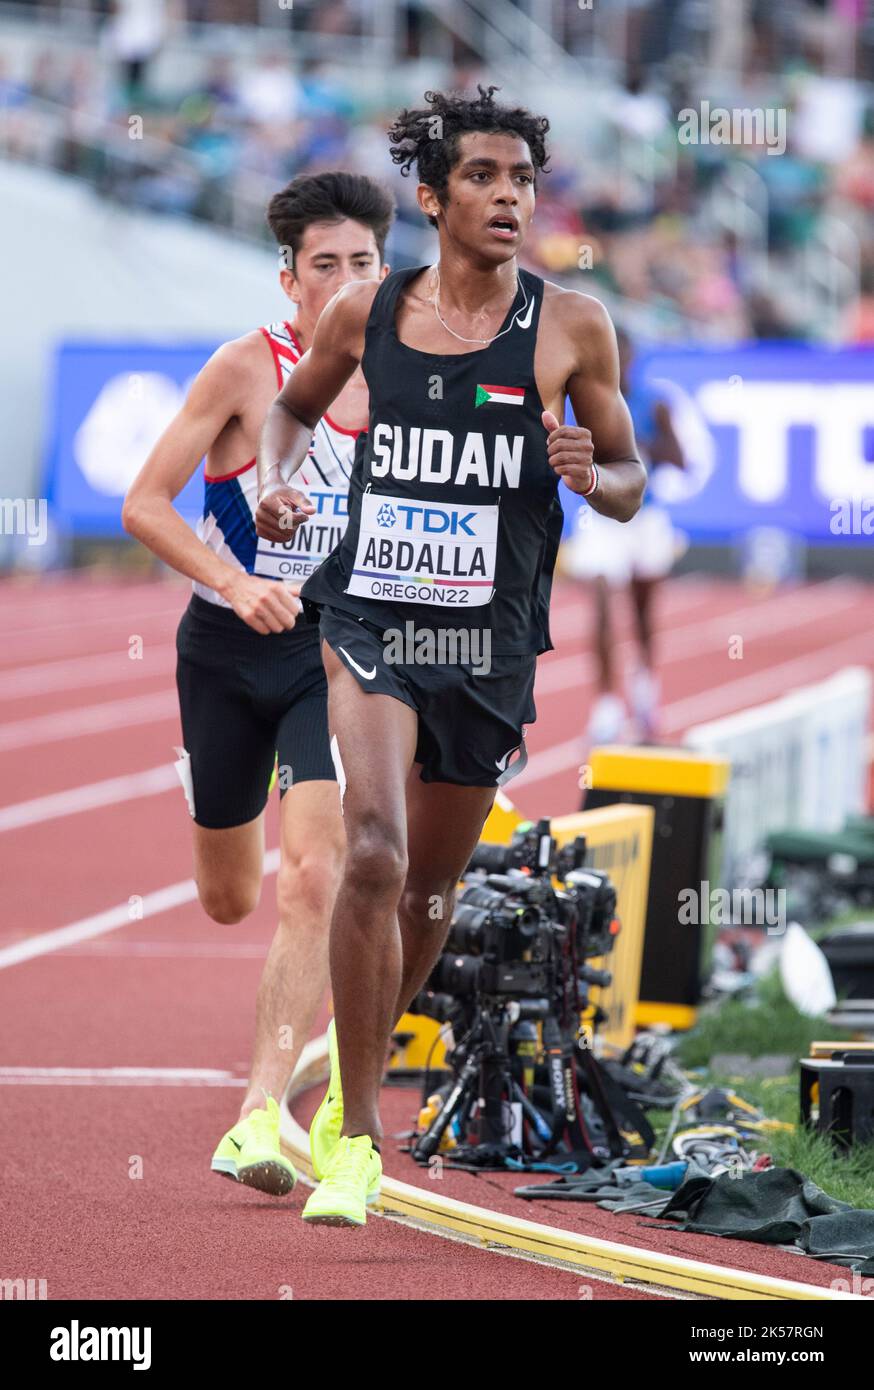 Yaseen Abdalla of Sudan competing in the men’s 5000m heats at the World Athletics Championships, Hayward Field, Eugene, Oregon USA on the 21st July 20 Stock Photo